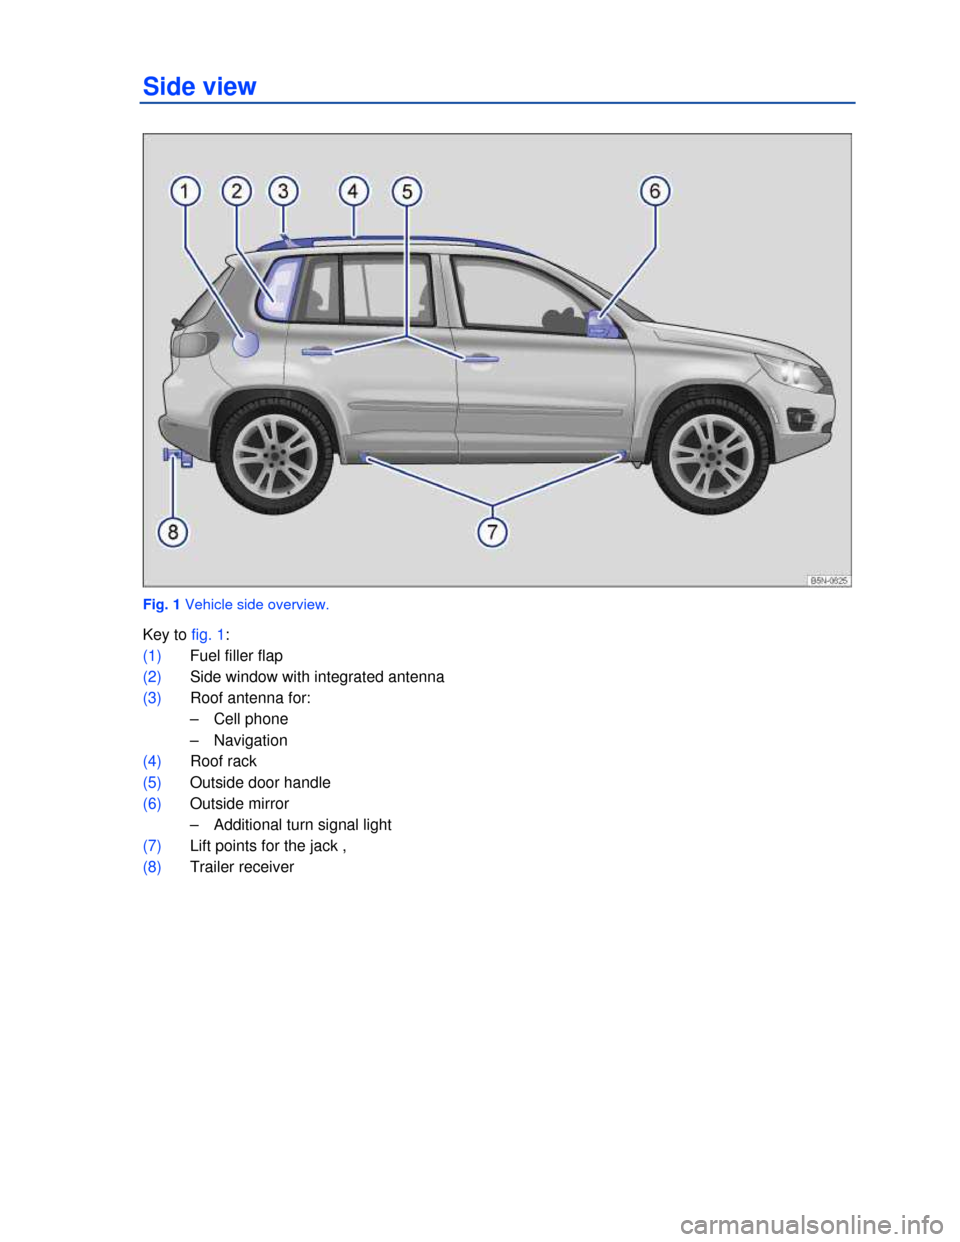 VOLKSWAGEN TIGUAN 2013 1.G Owners Manual  
Side view 
 
Fig. 1 Vehicle side overview. 
Key to fig. 1: 
(1) Fuel filler flap  
(2) Side window with integrated antenna  
(3) Roof antenna for: 
–  Cell phone 
–  Navigation 
(4) Roof rack 
(